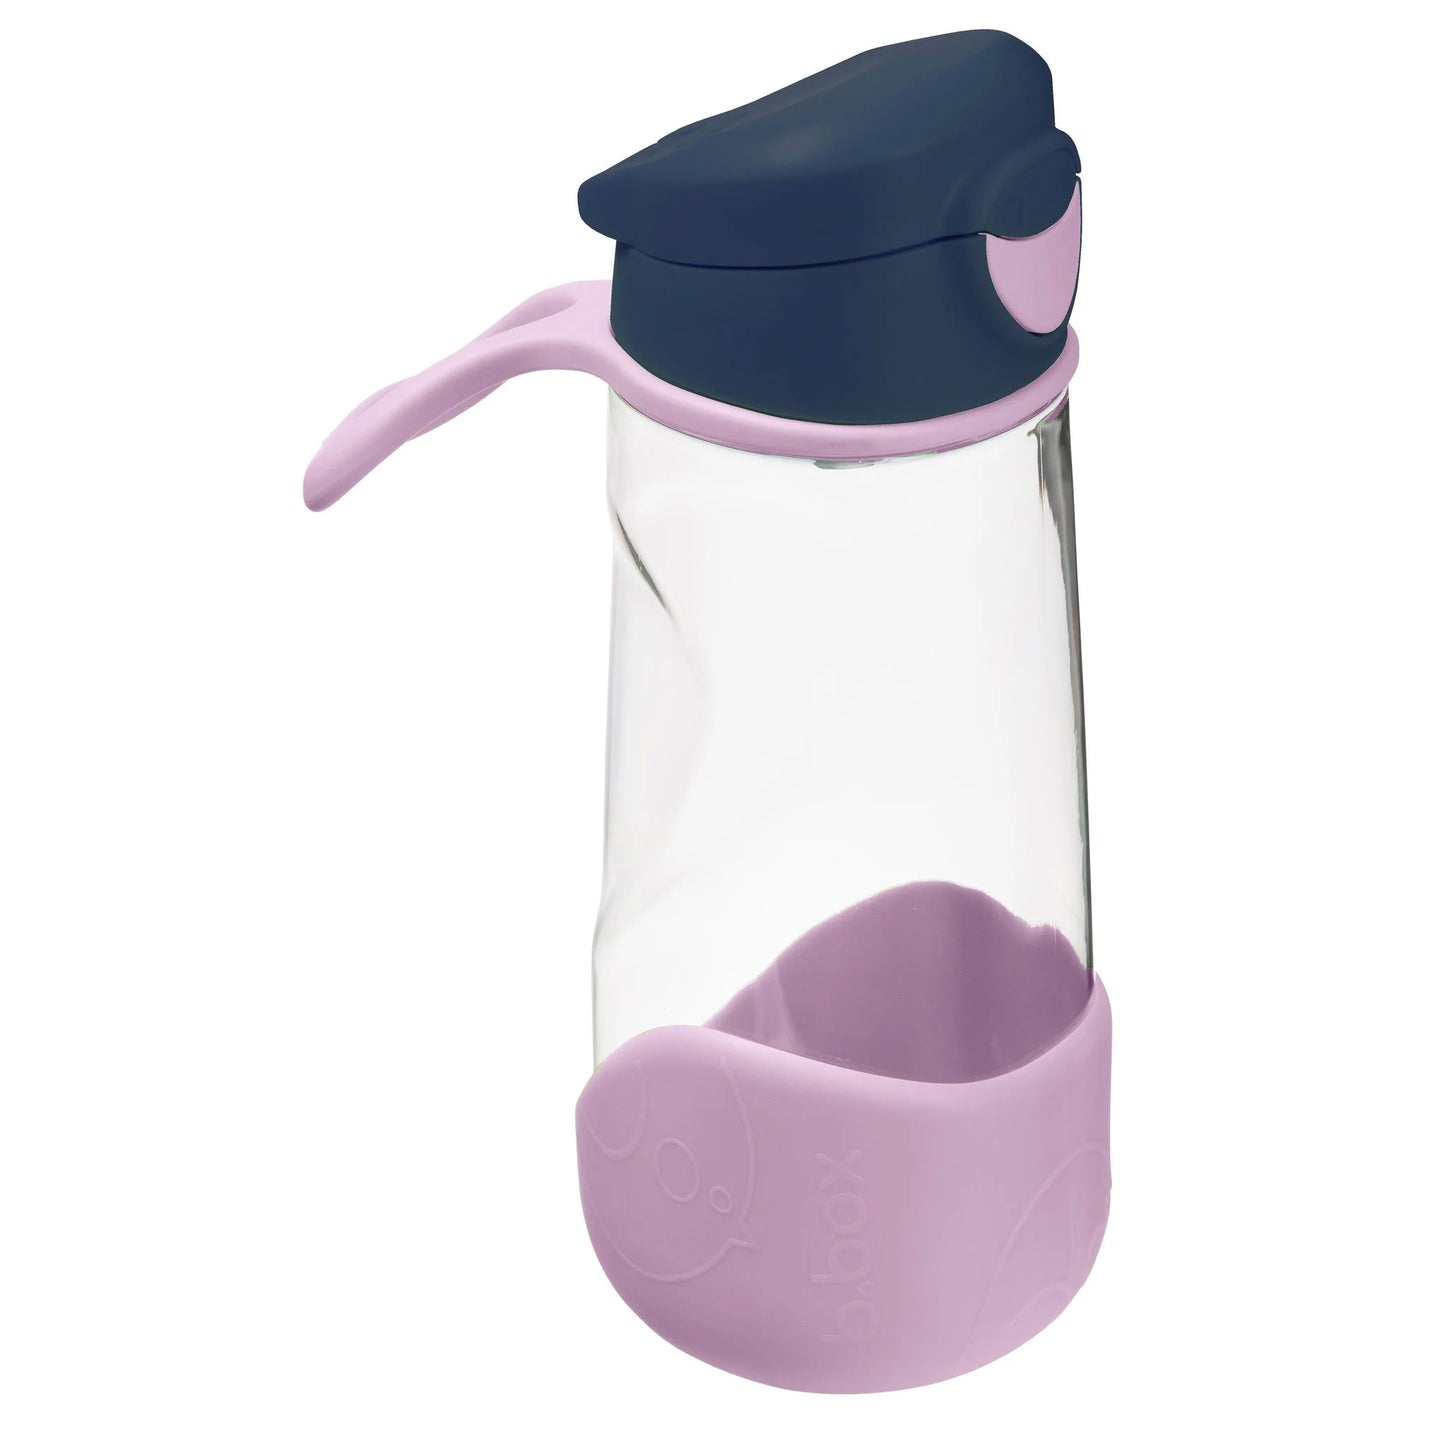 Perfect for active kids on the go, the sports spout bottle offers no-fuss easy flow drinking in their unique ergonomic triangle bottle. Its silicone spout requires no compression, and features a slight valve to prevent spills. Large push button and flip top lid makes it easy for kids to open and drink from.